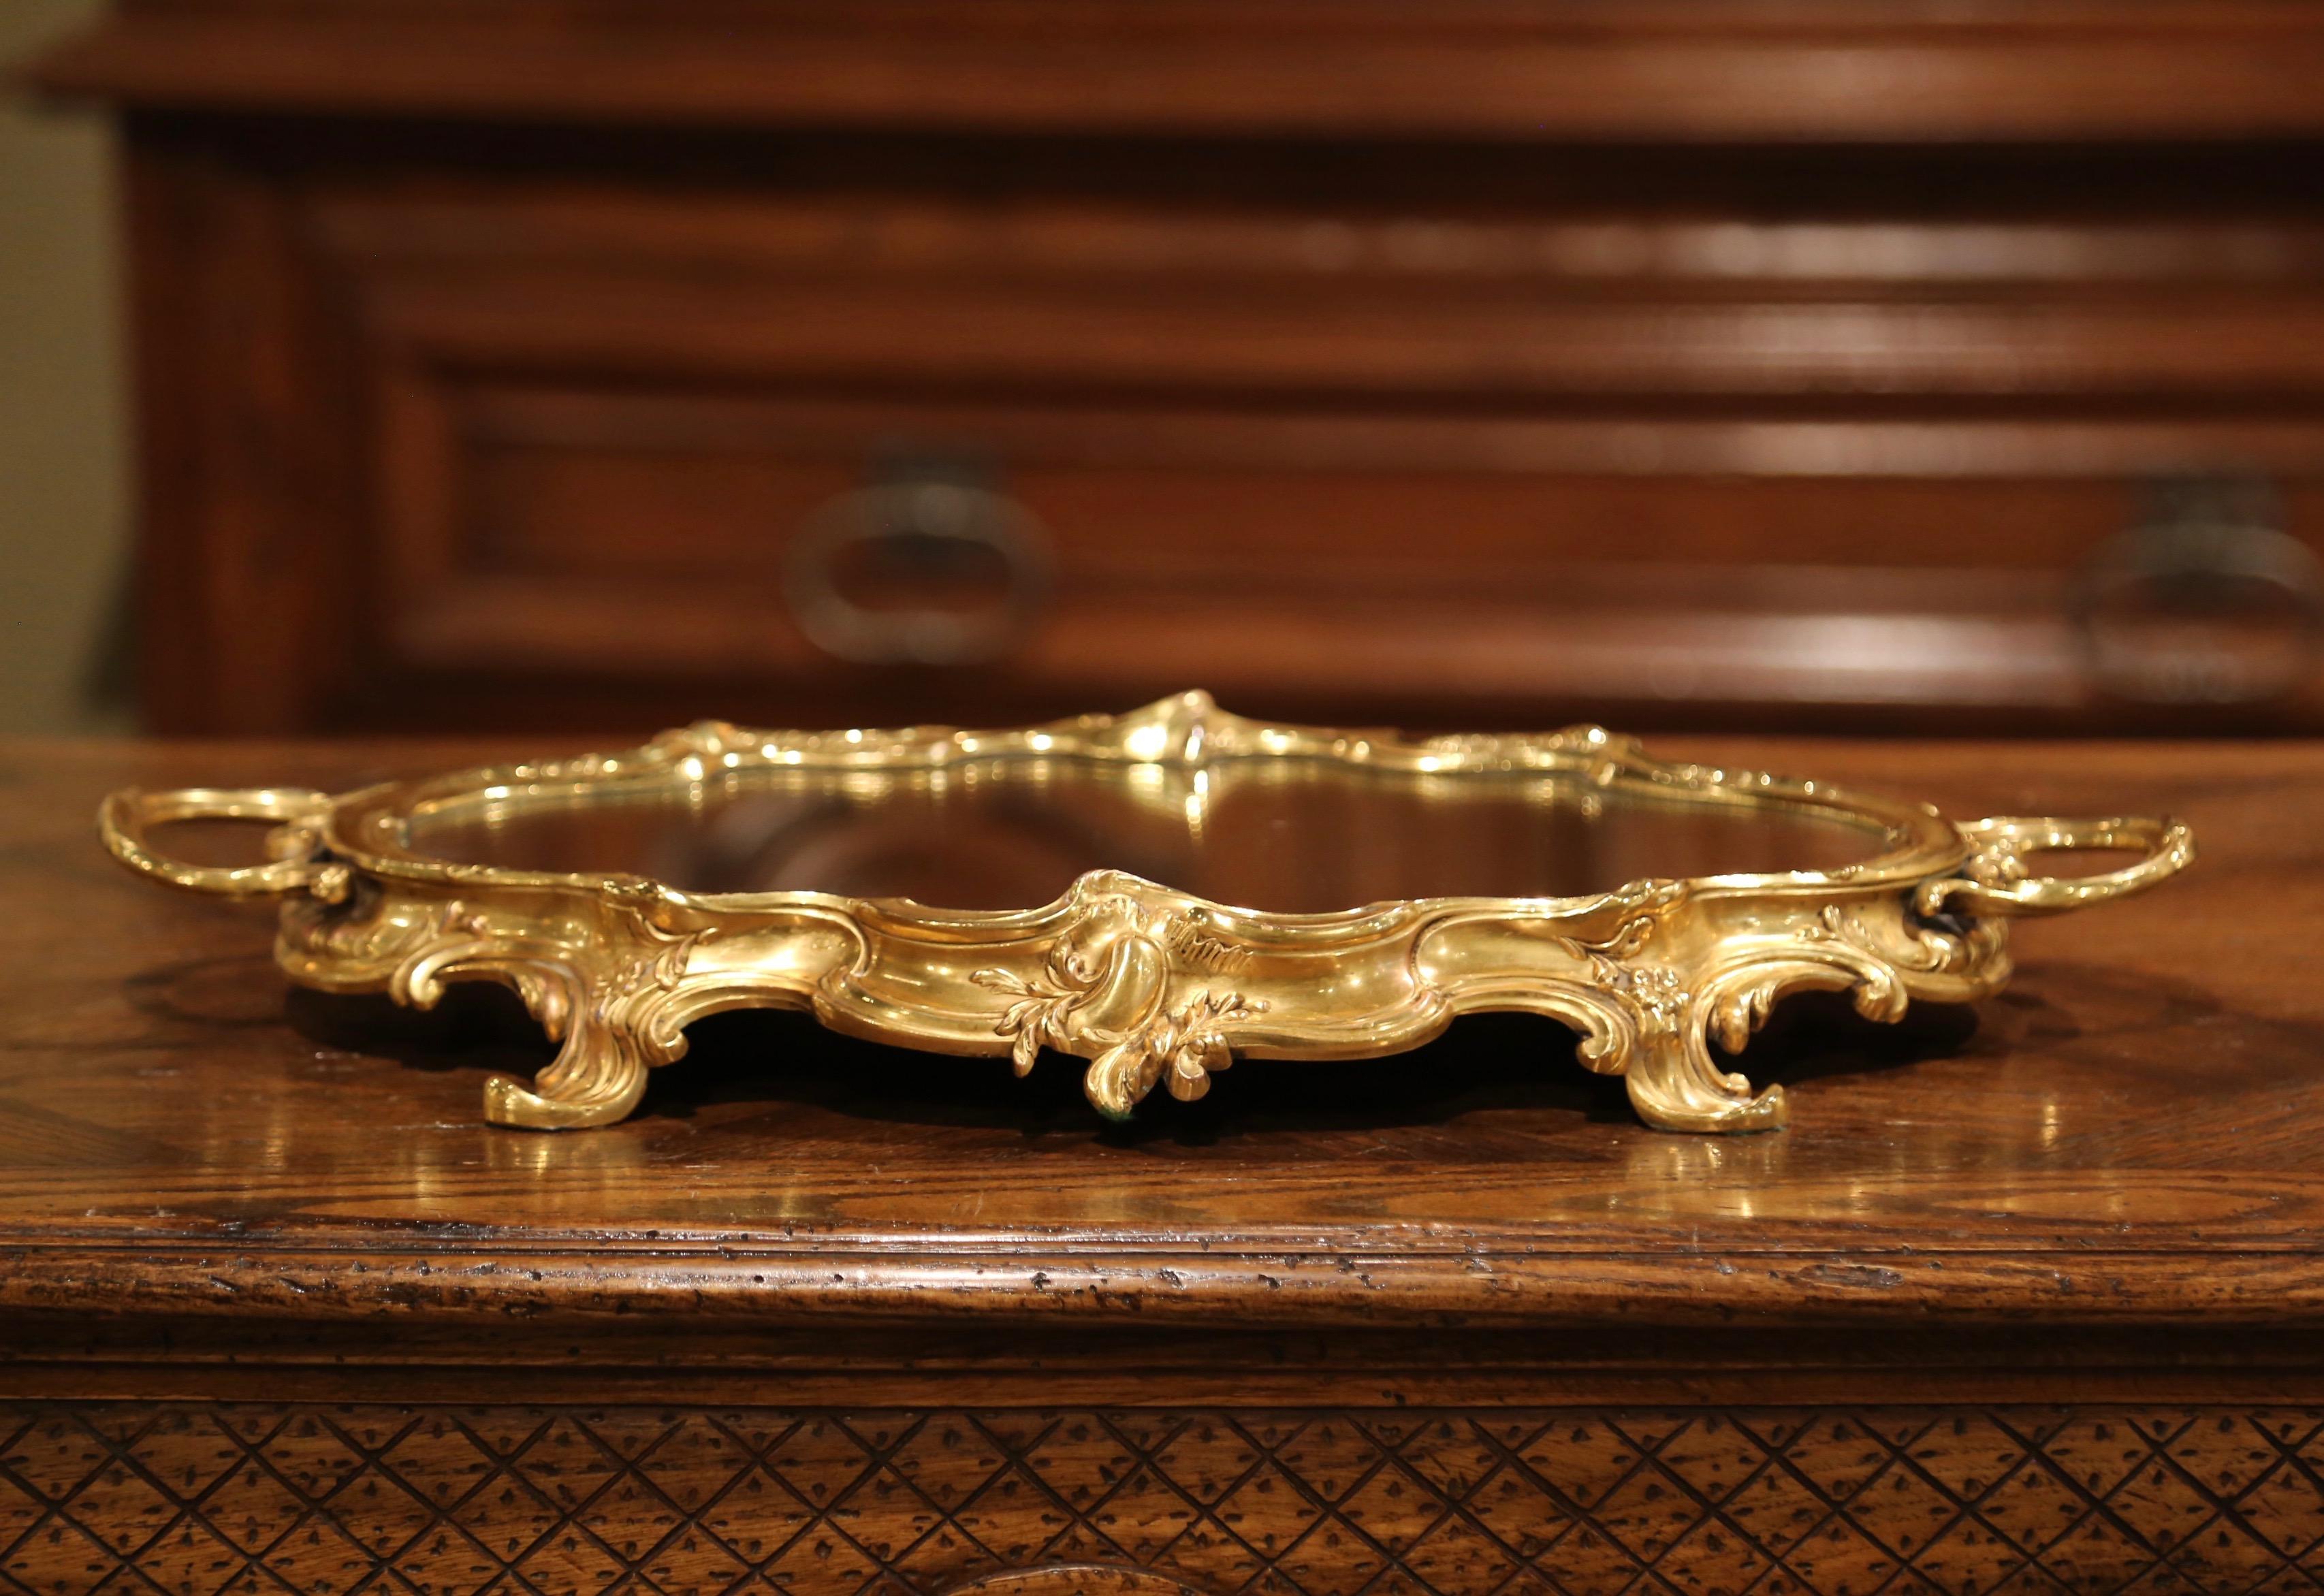 This elegant antique Louis XV gilt table tray was created in Paris, France, circa 1920. Oval in shape, the bronze plateau stands on four acanthus leaves feet over a scalloped edge decorated with floral and scroll motifs. The center piece is